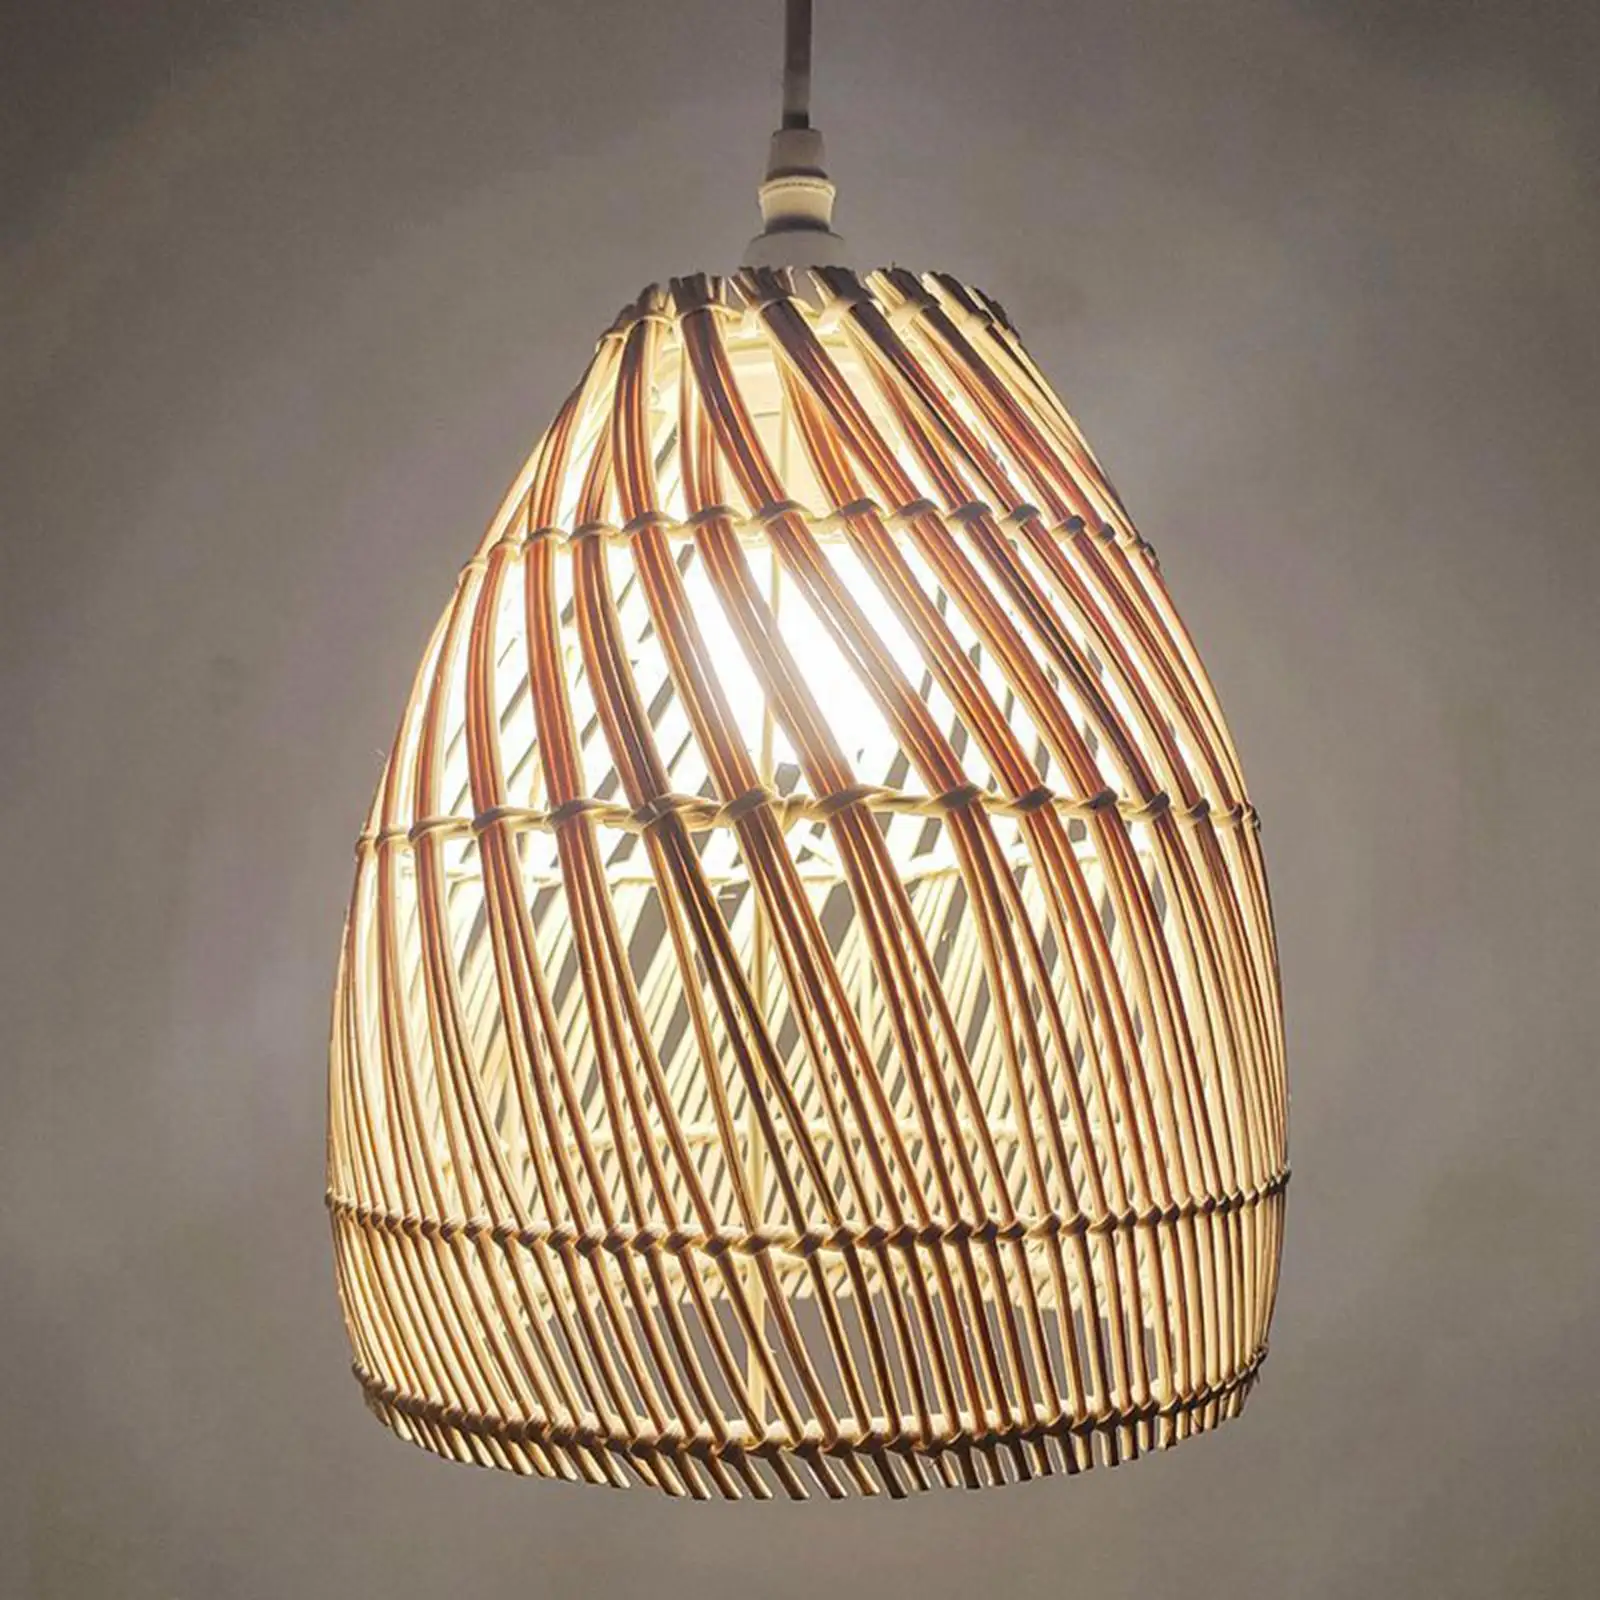 Ceiling Pendant Light Shade 1 Piece Weaved Light Fixture Wicker Lamp Shade for Pendant Light, Dining Room hotels Room Home